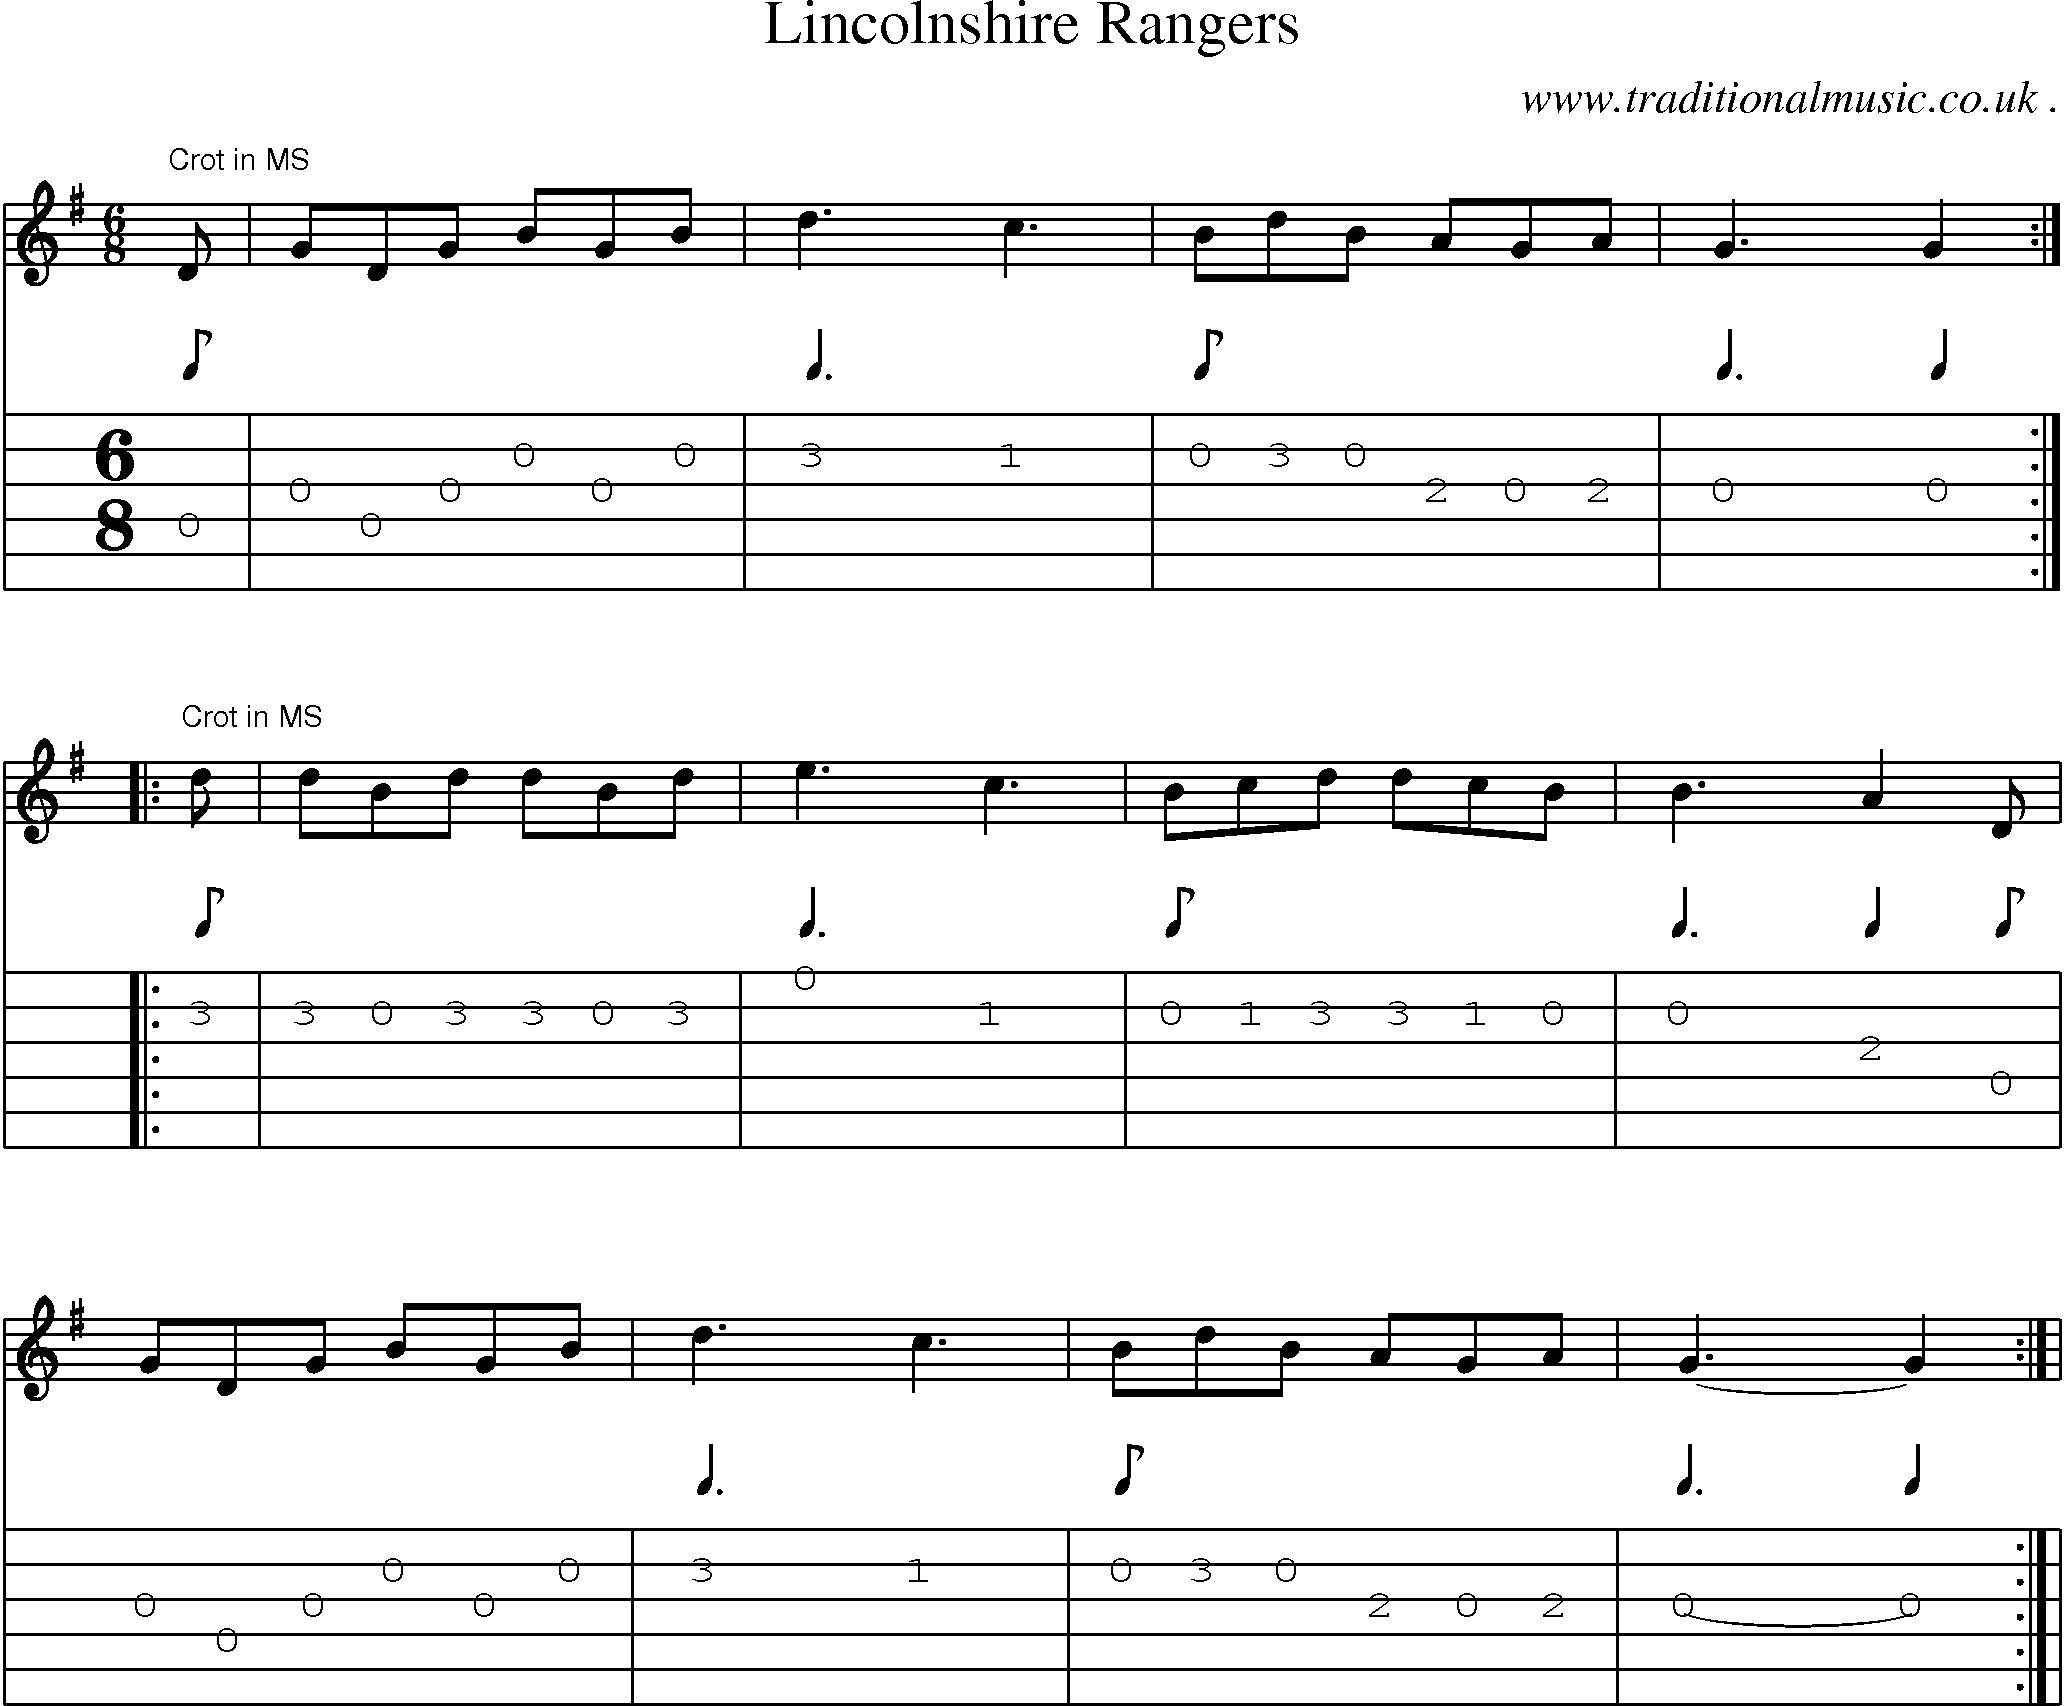 Sheet-Music and Guitar Tabs for Lincolnshire Rangers